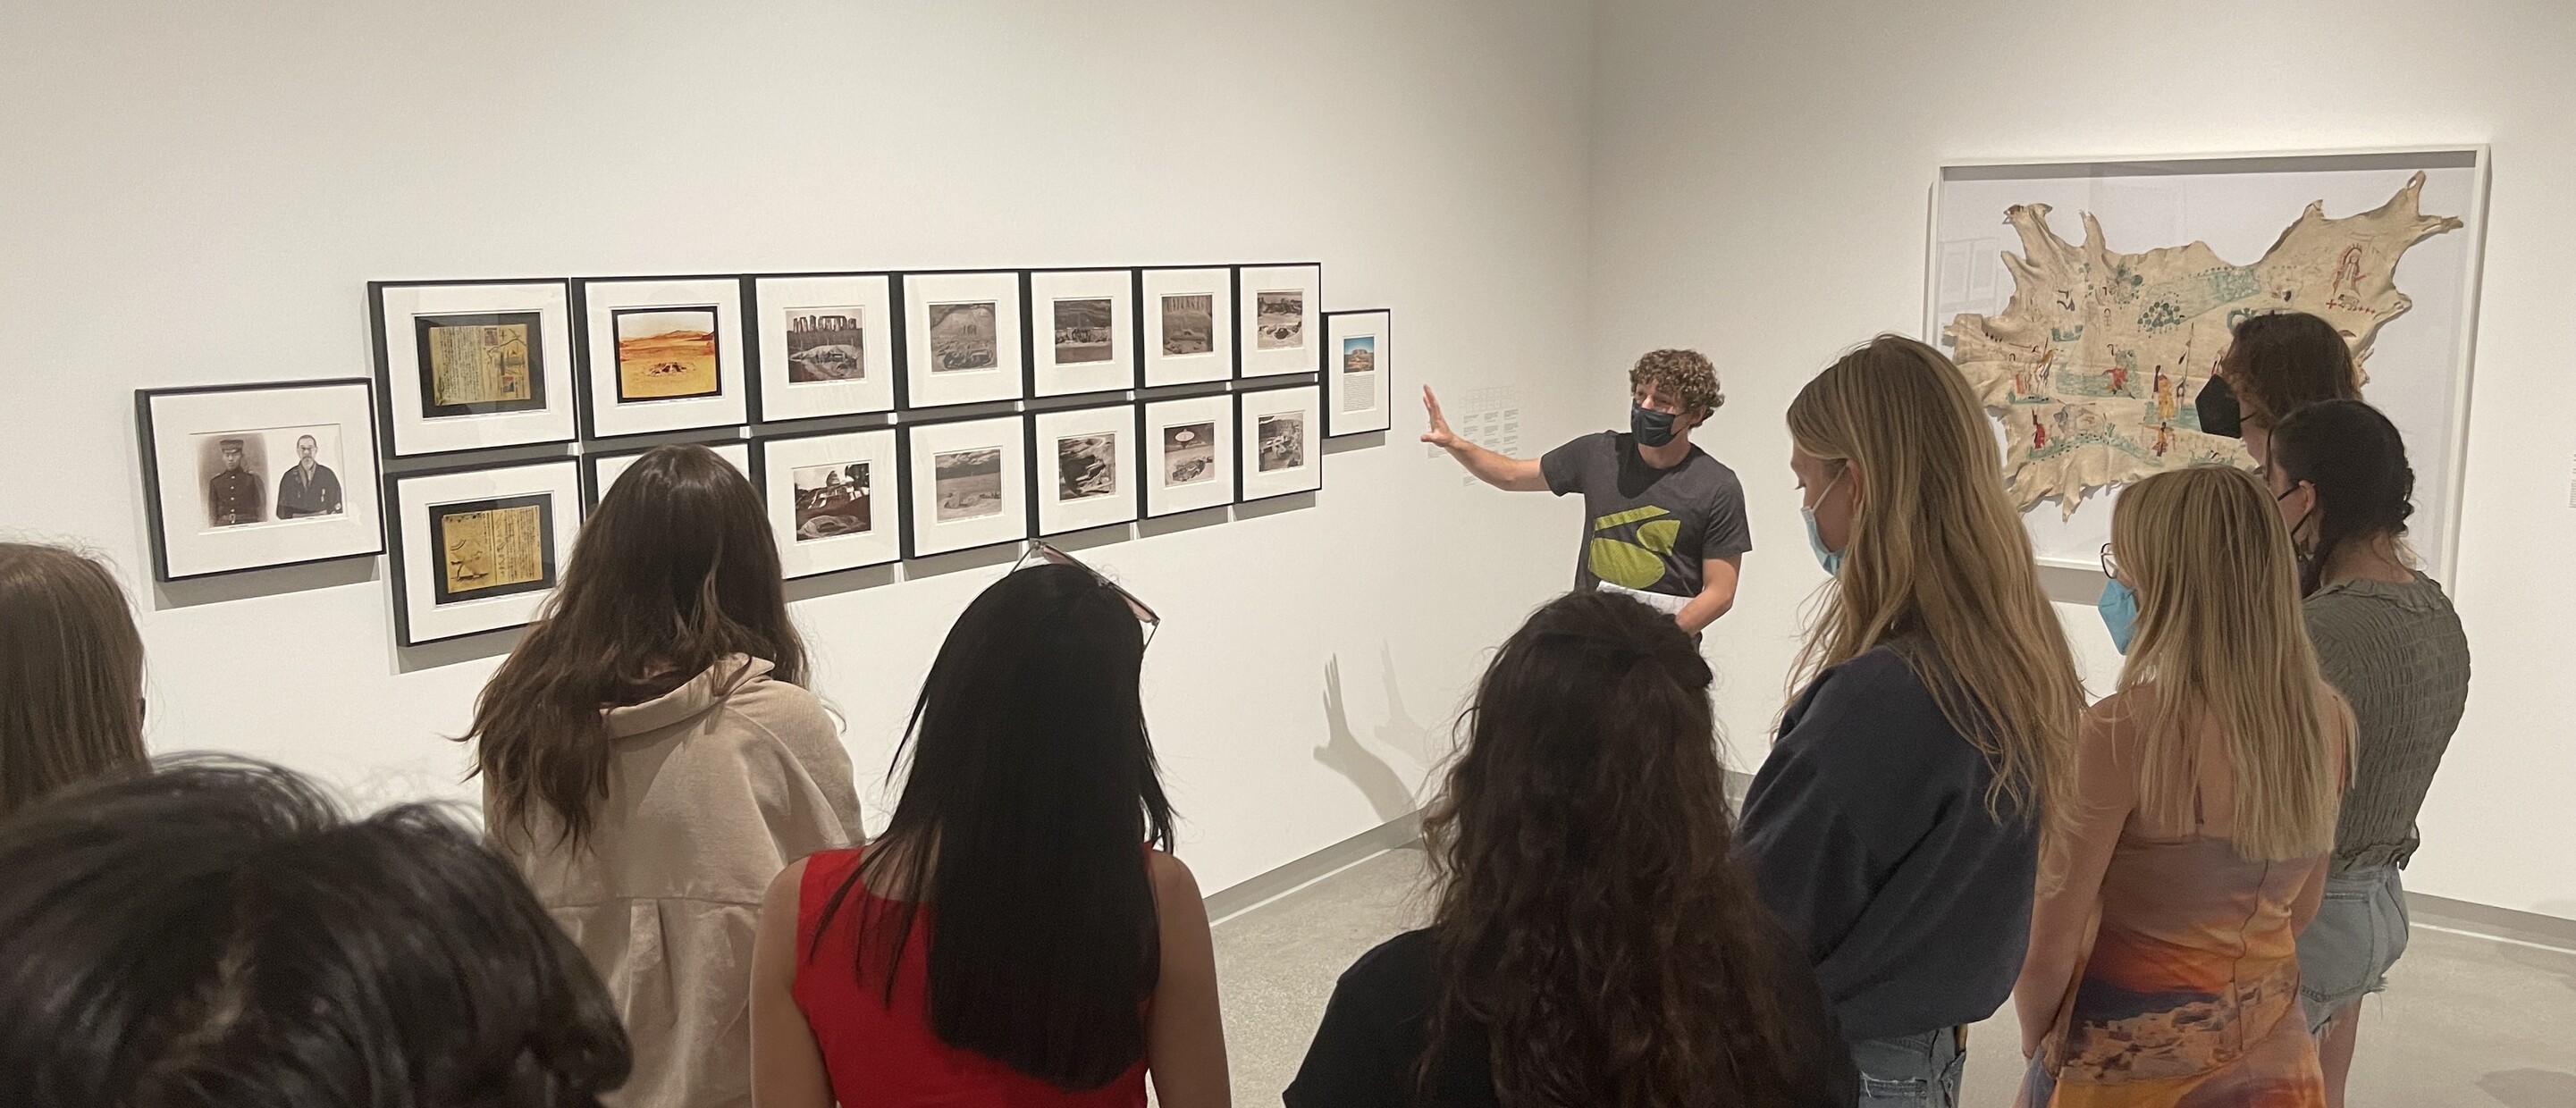 student gestures towards photographs on gallery wall in front of another group of students